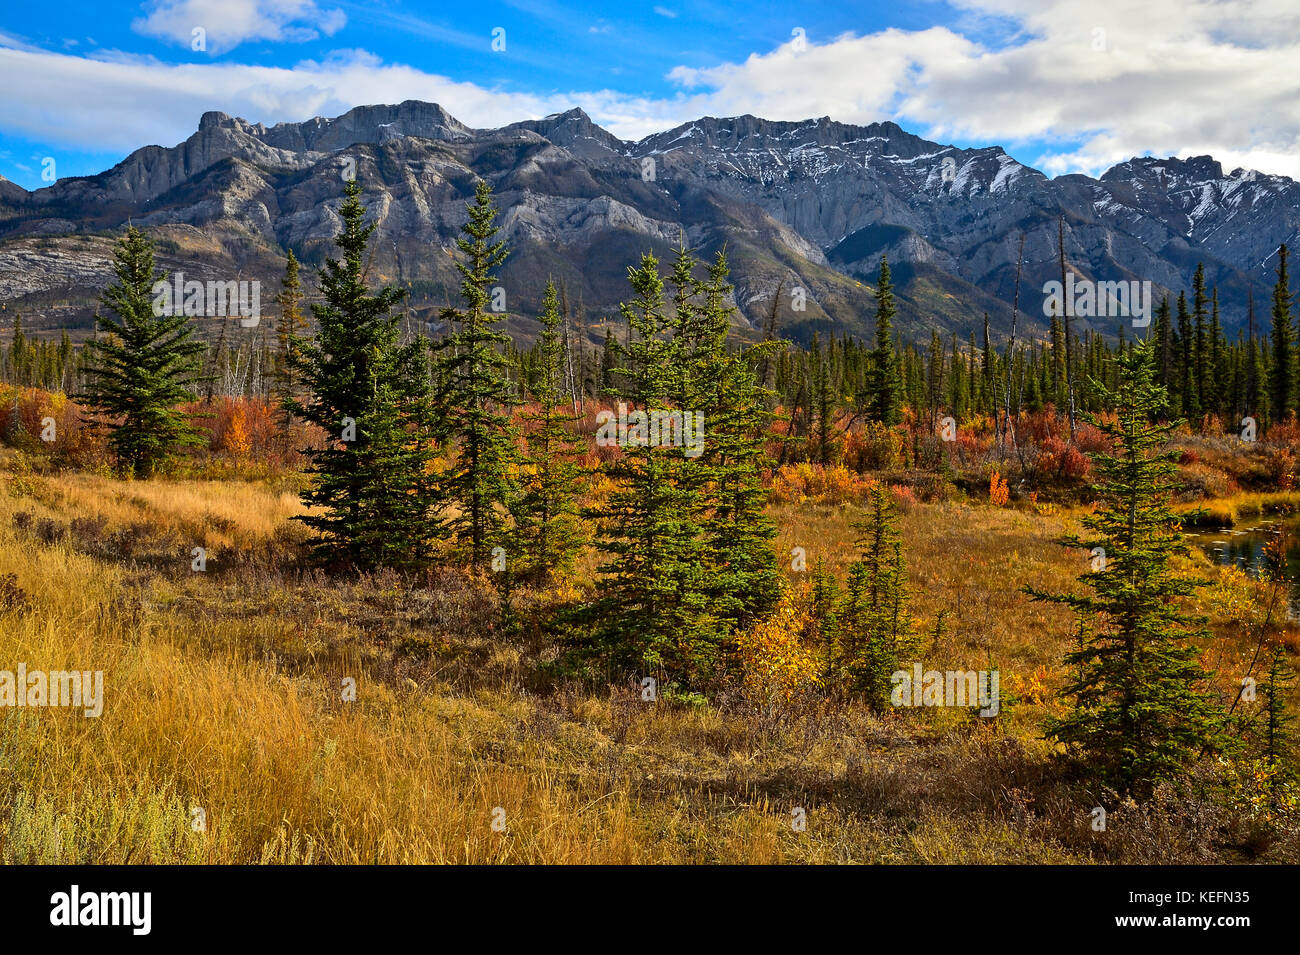 A fall landscape image showing the Miette mountain range in Jasper National Park, Alberta,Canada with the changing autumn landscape in the foreground. Stock Photo